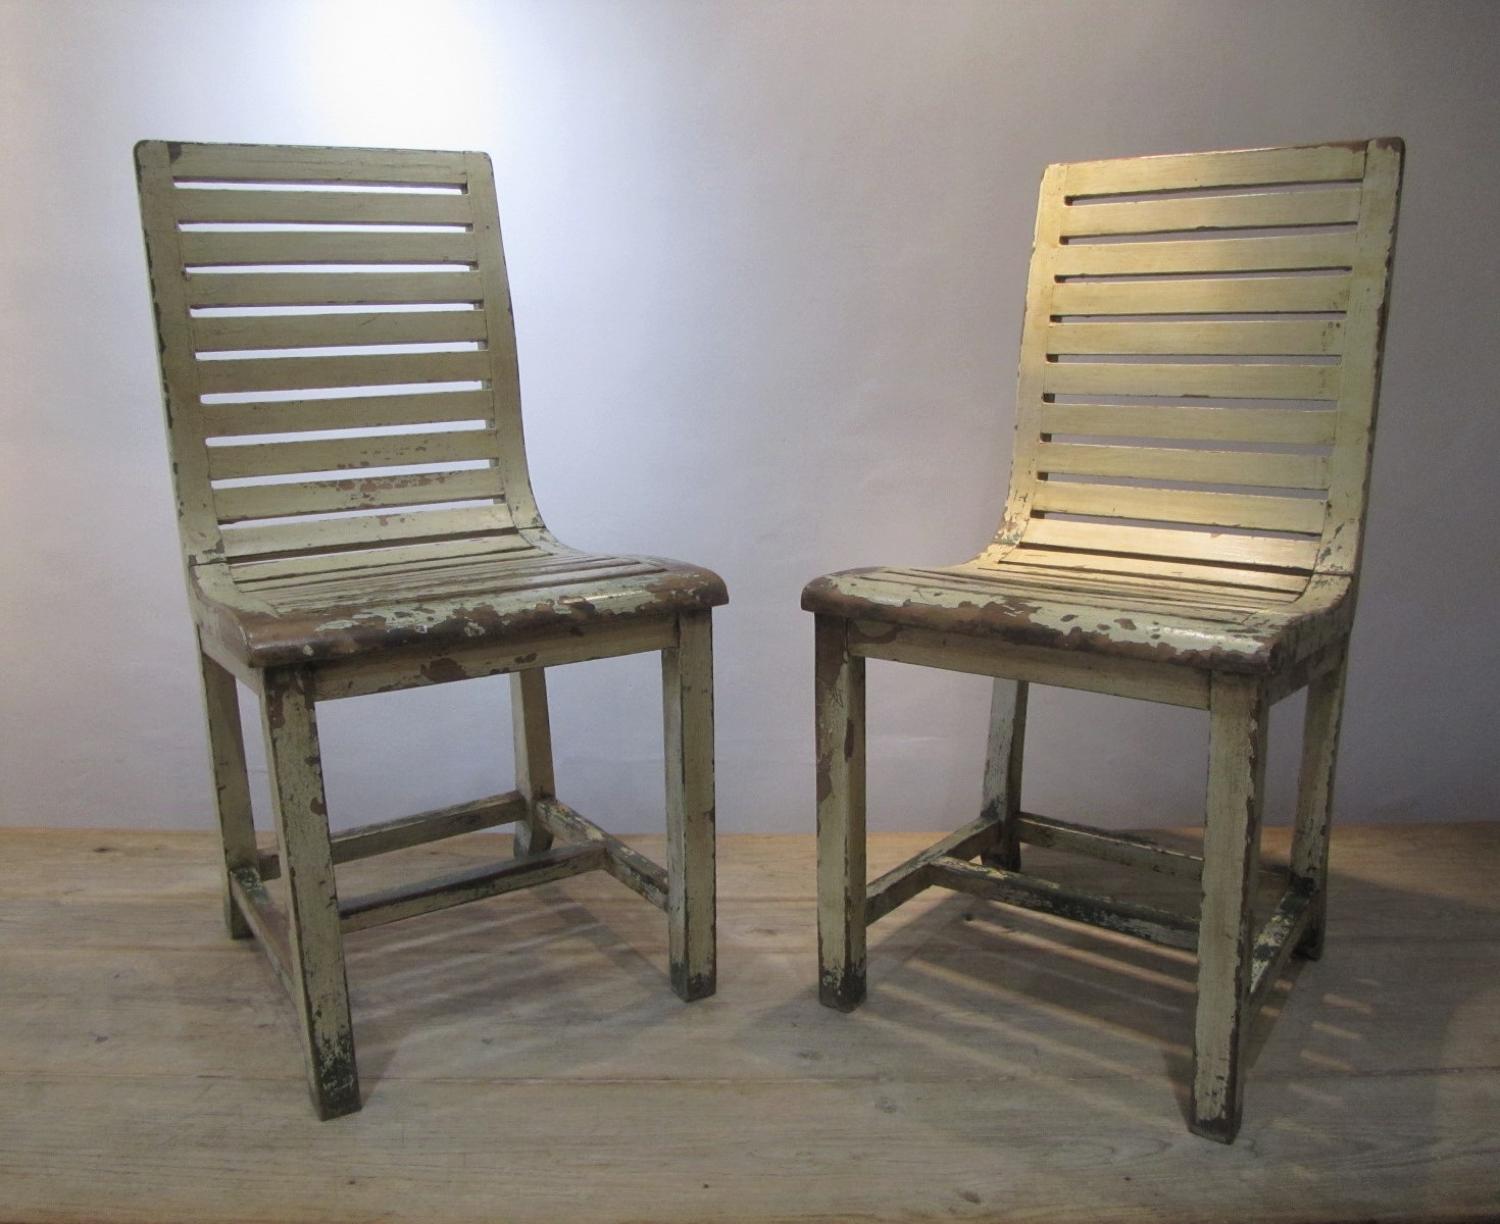 A pair of French slatted side chairs